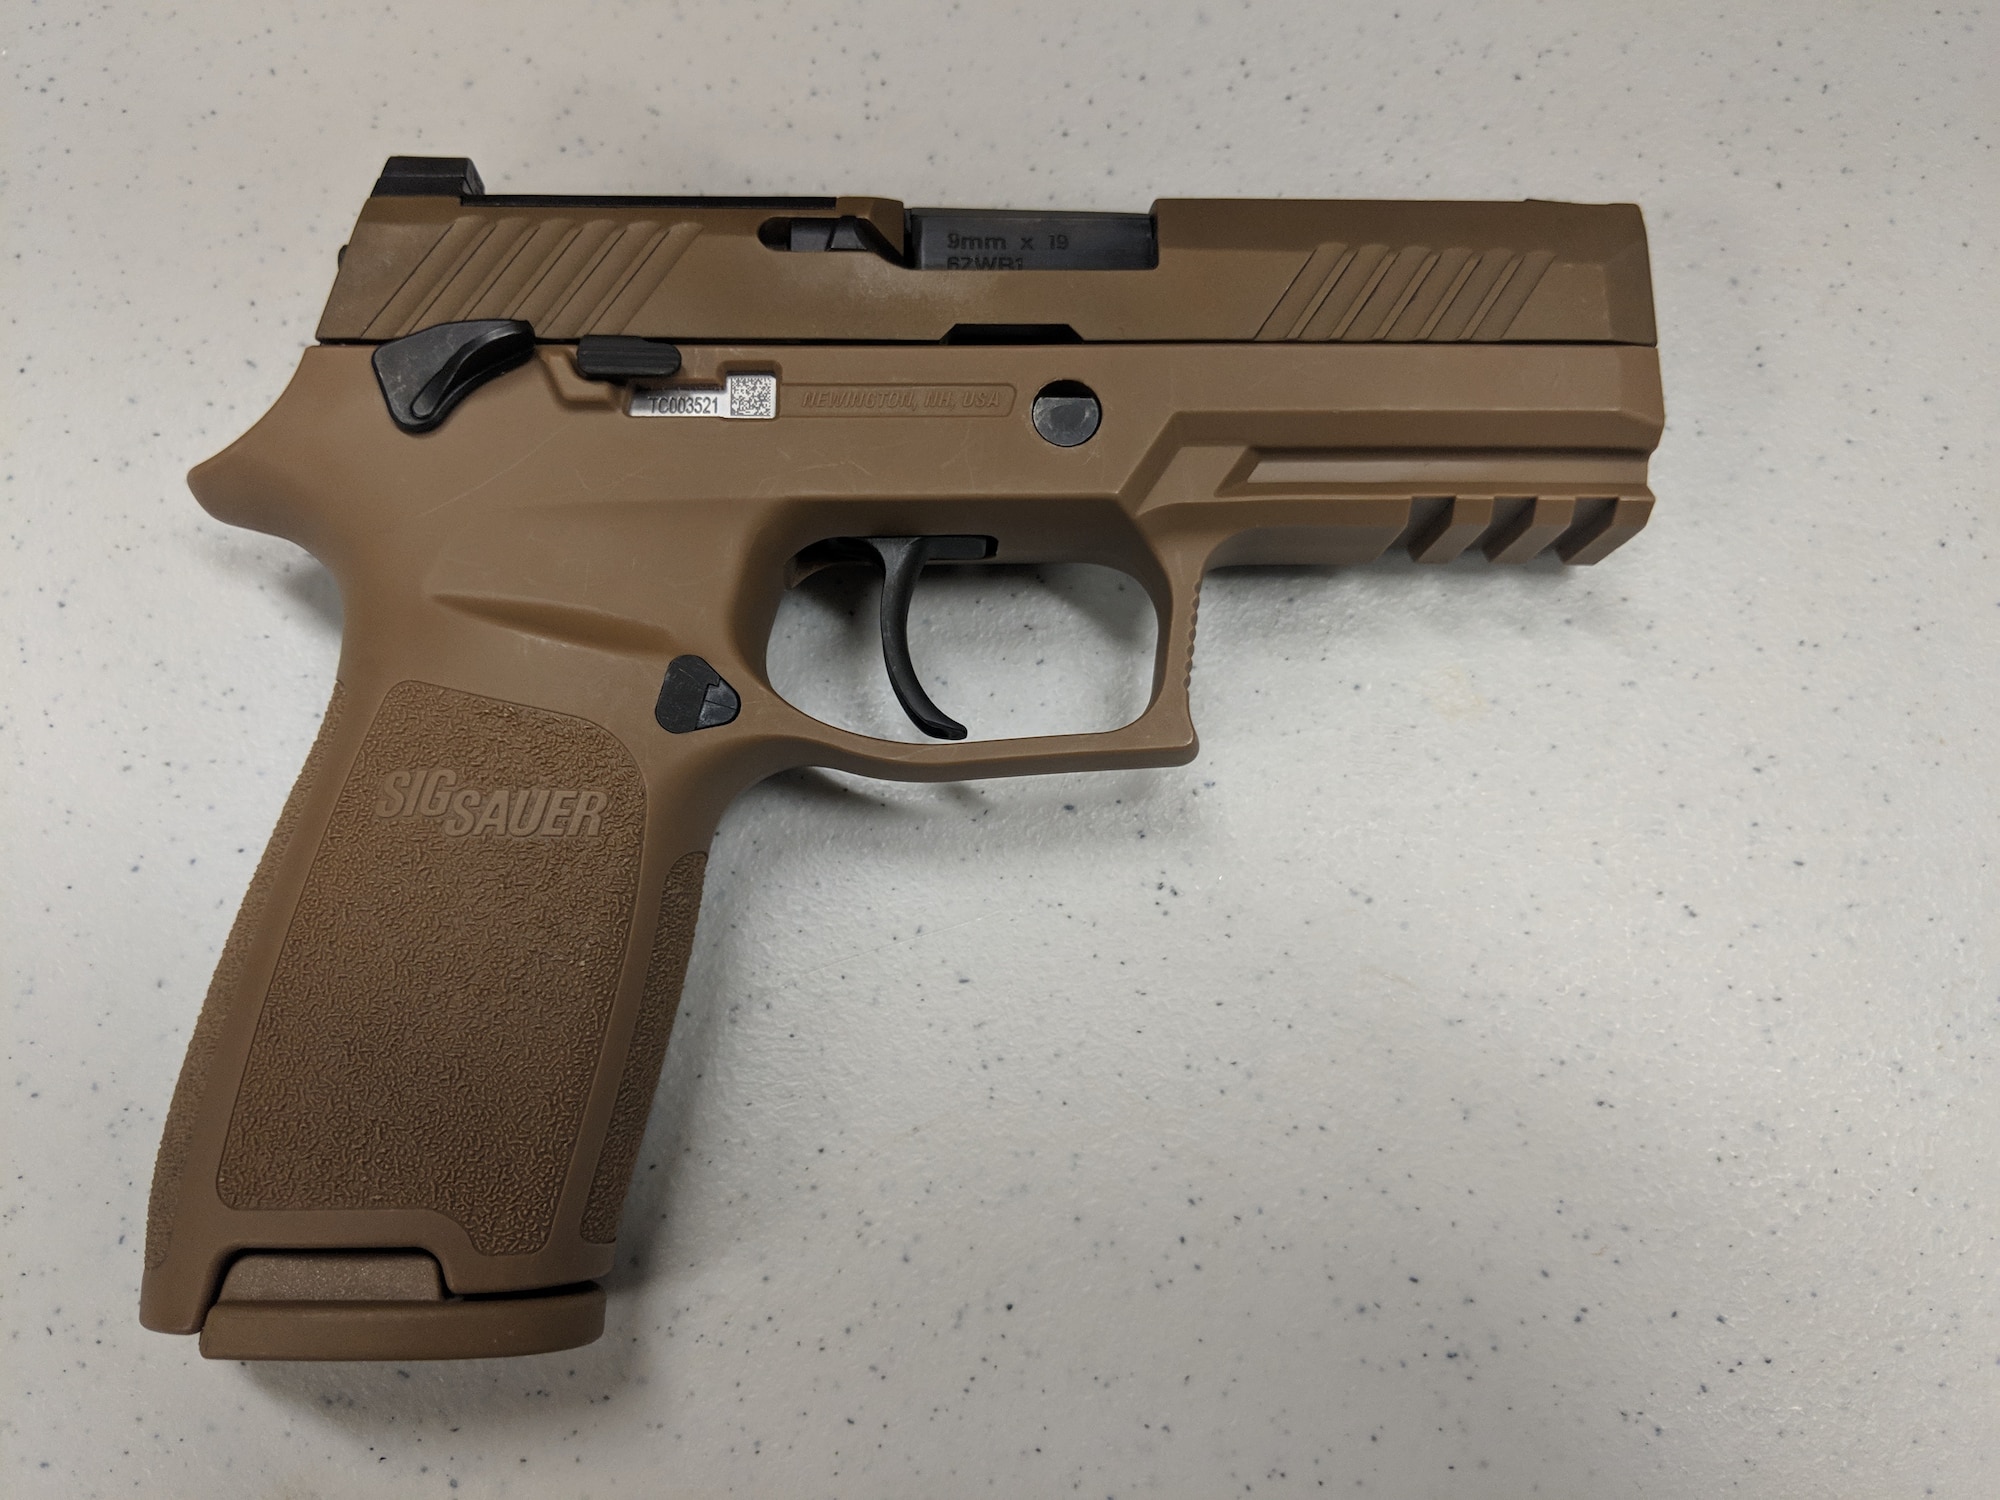 The Air Force Security Forces Center, in partnership with the Air Force Small Arms Program Office, has begun fielding the new M18 Modular Handgun System to Security Forces units. (U.S. Air Force photo by Vicki Stein)